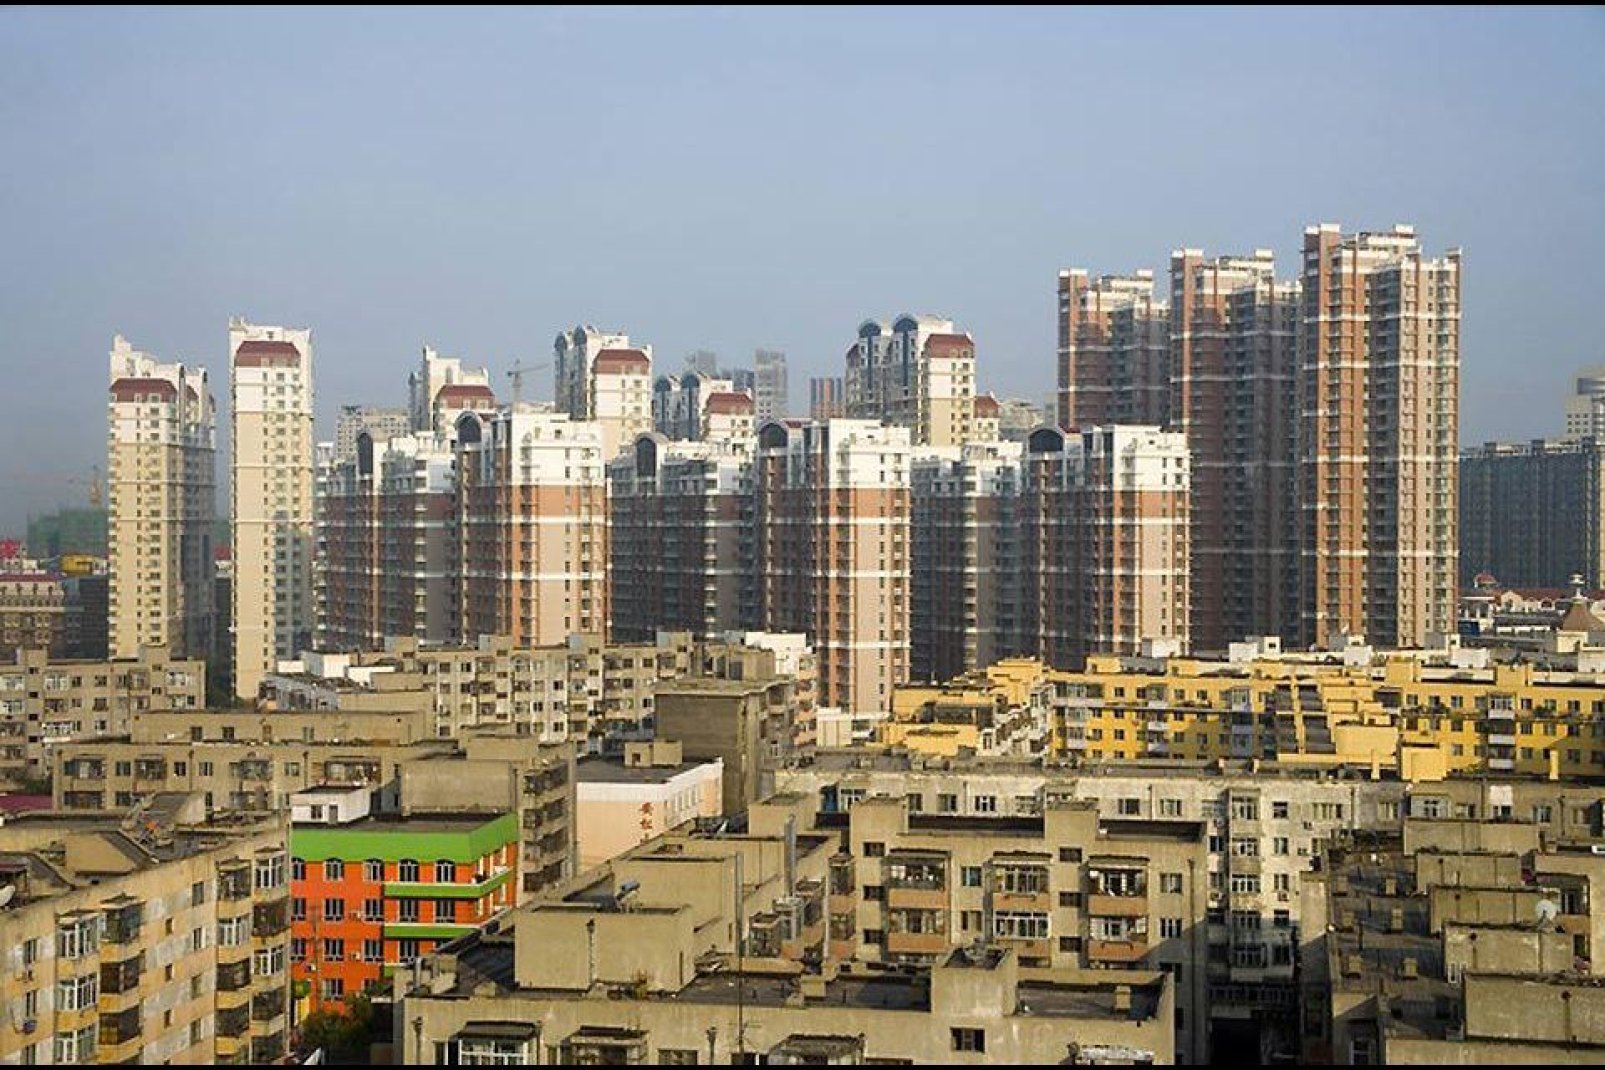 Harbin is an industrial city in full economic expansion.